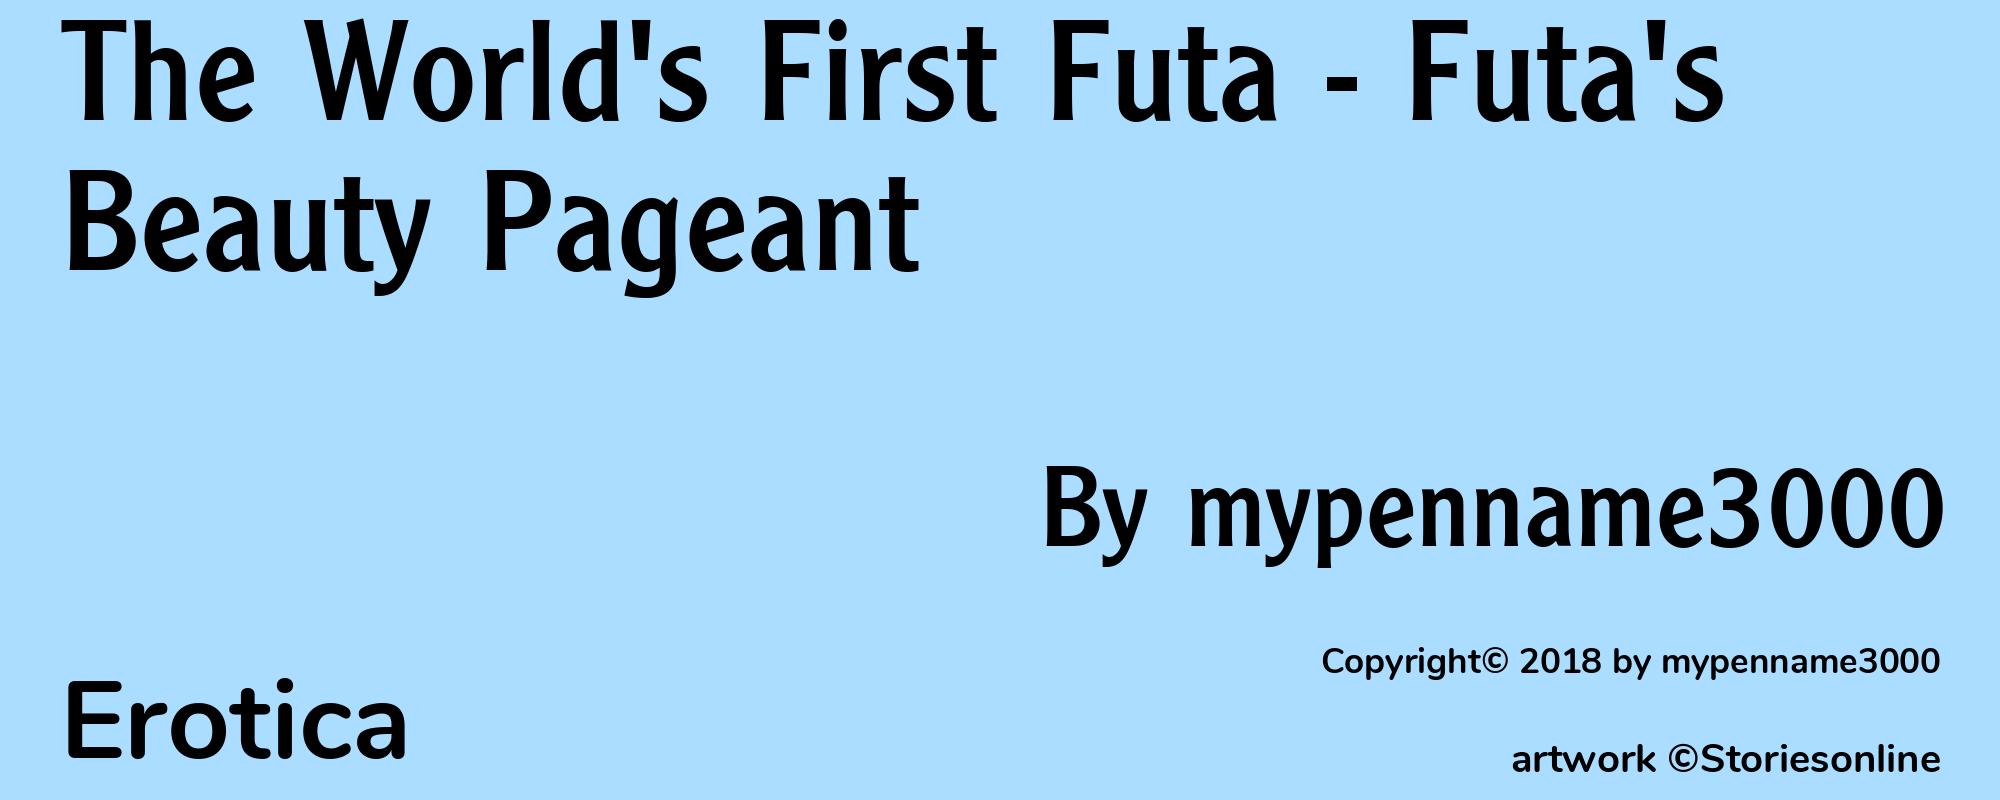 The World's First Futa - Futa's Beauty Pageant - Cover